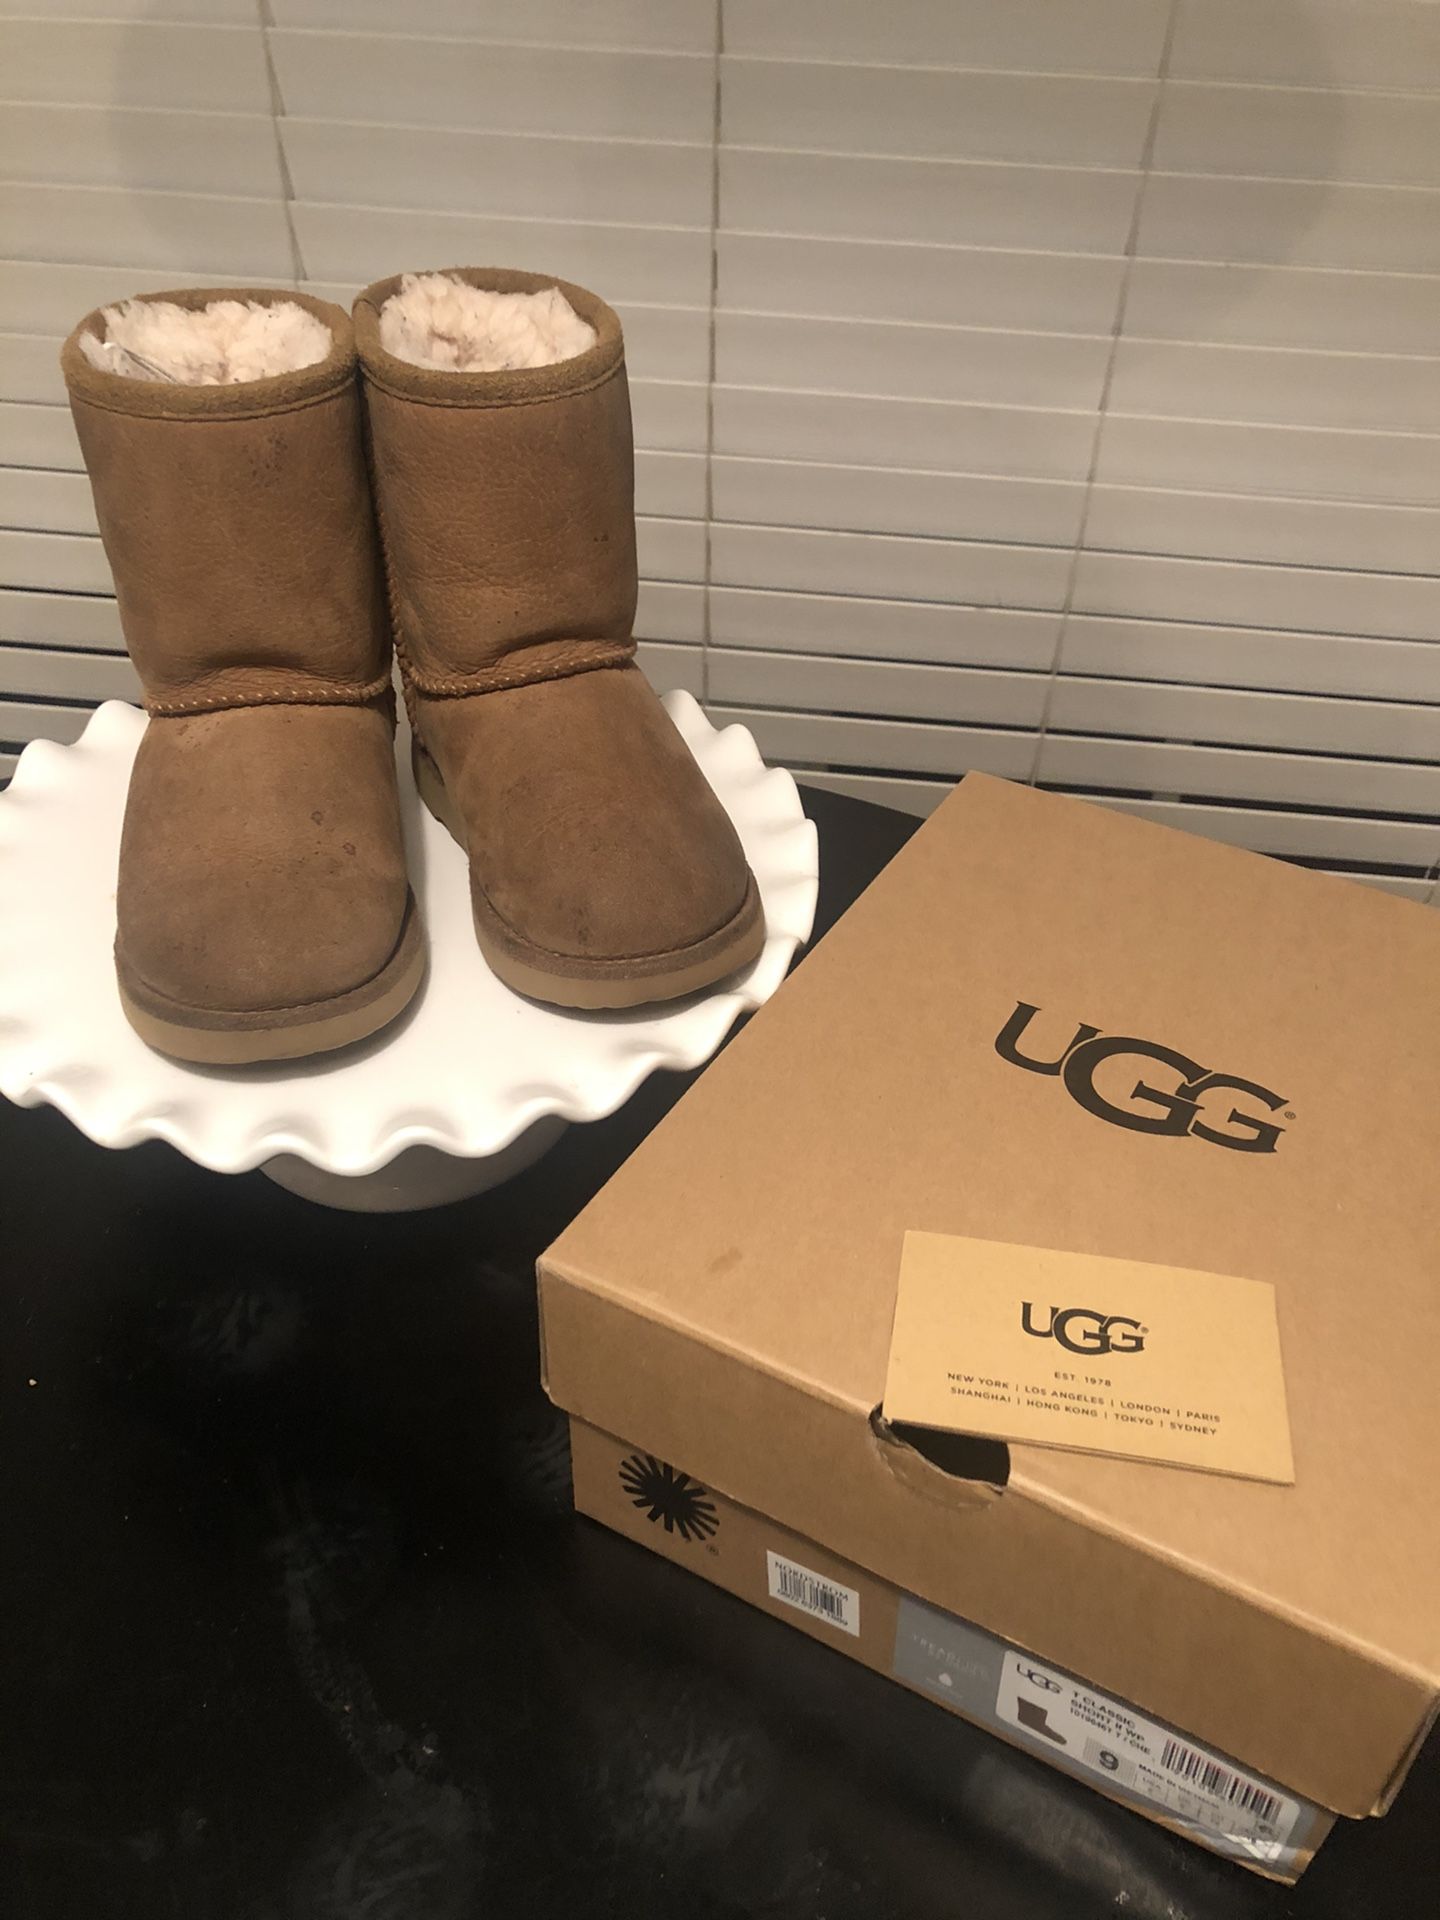 Ugg Boots (toddler/kids size 9)